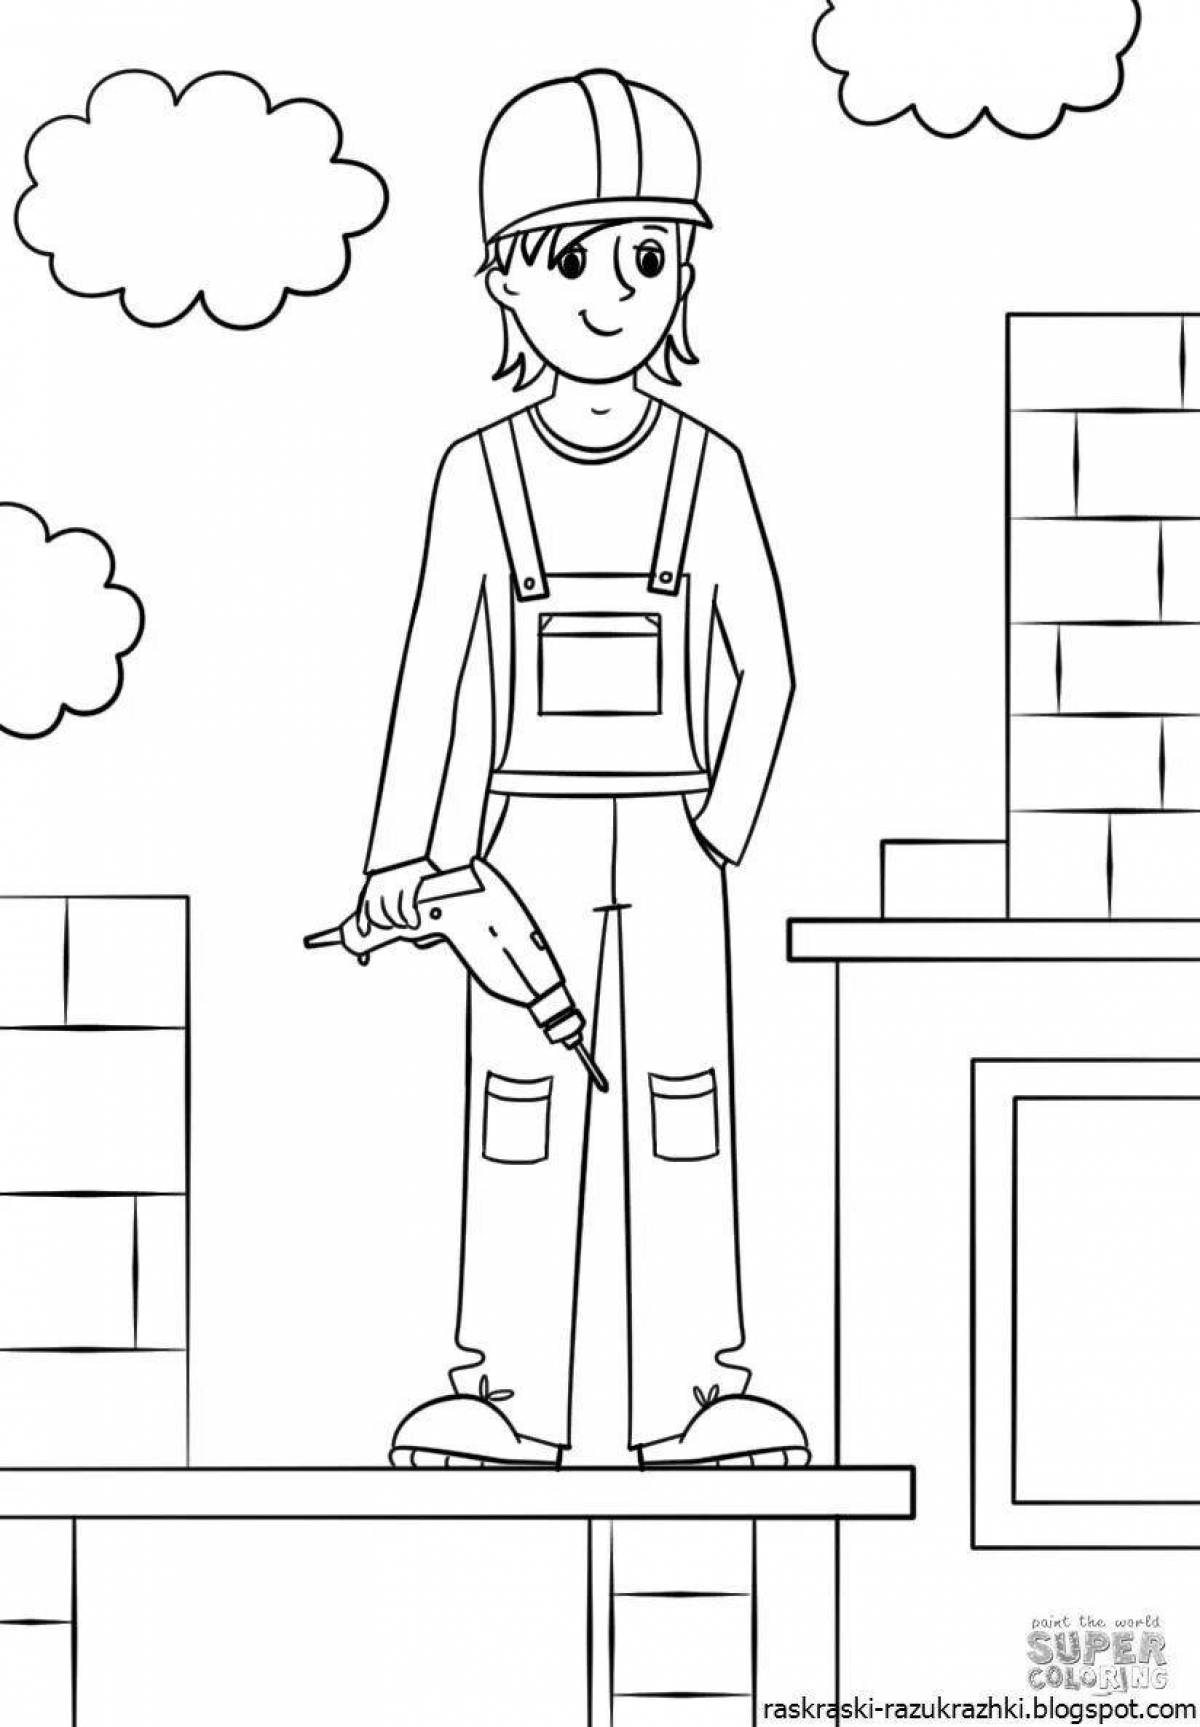 Exciting nurse coloring page